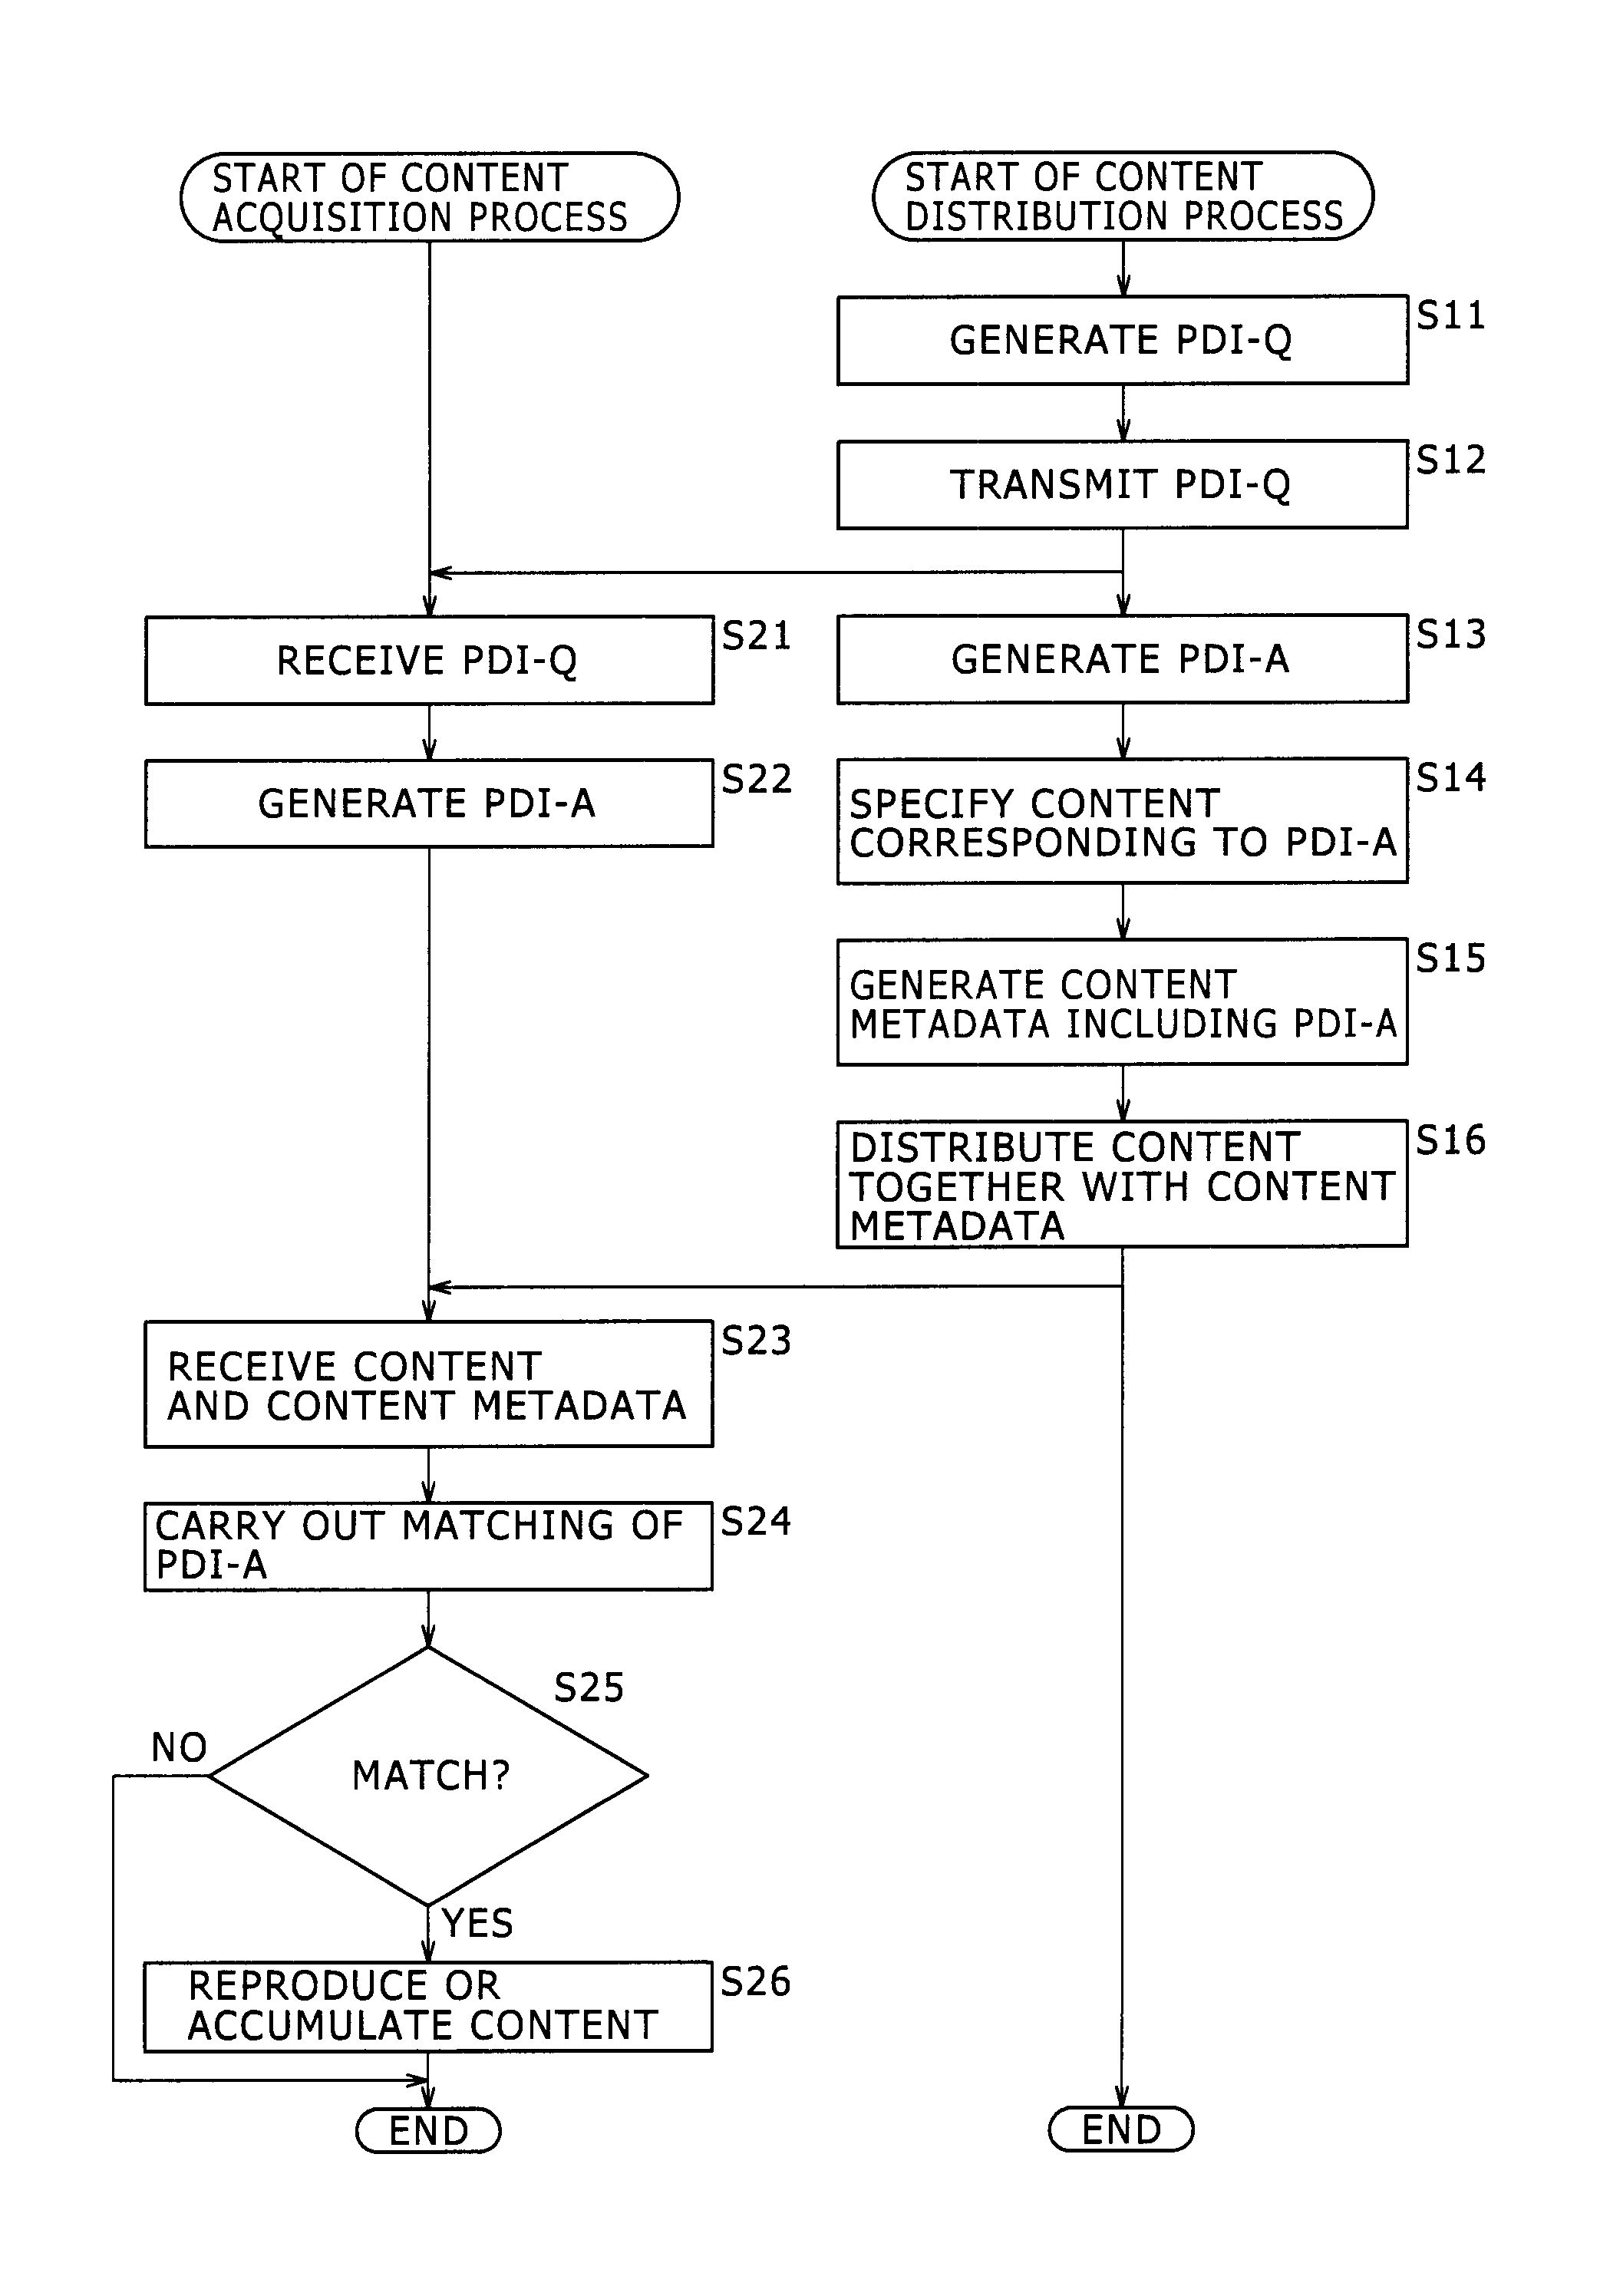 Transmission and reception apparatus, methods, and systems for filtering content